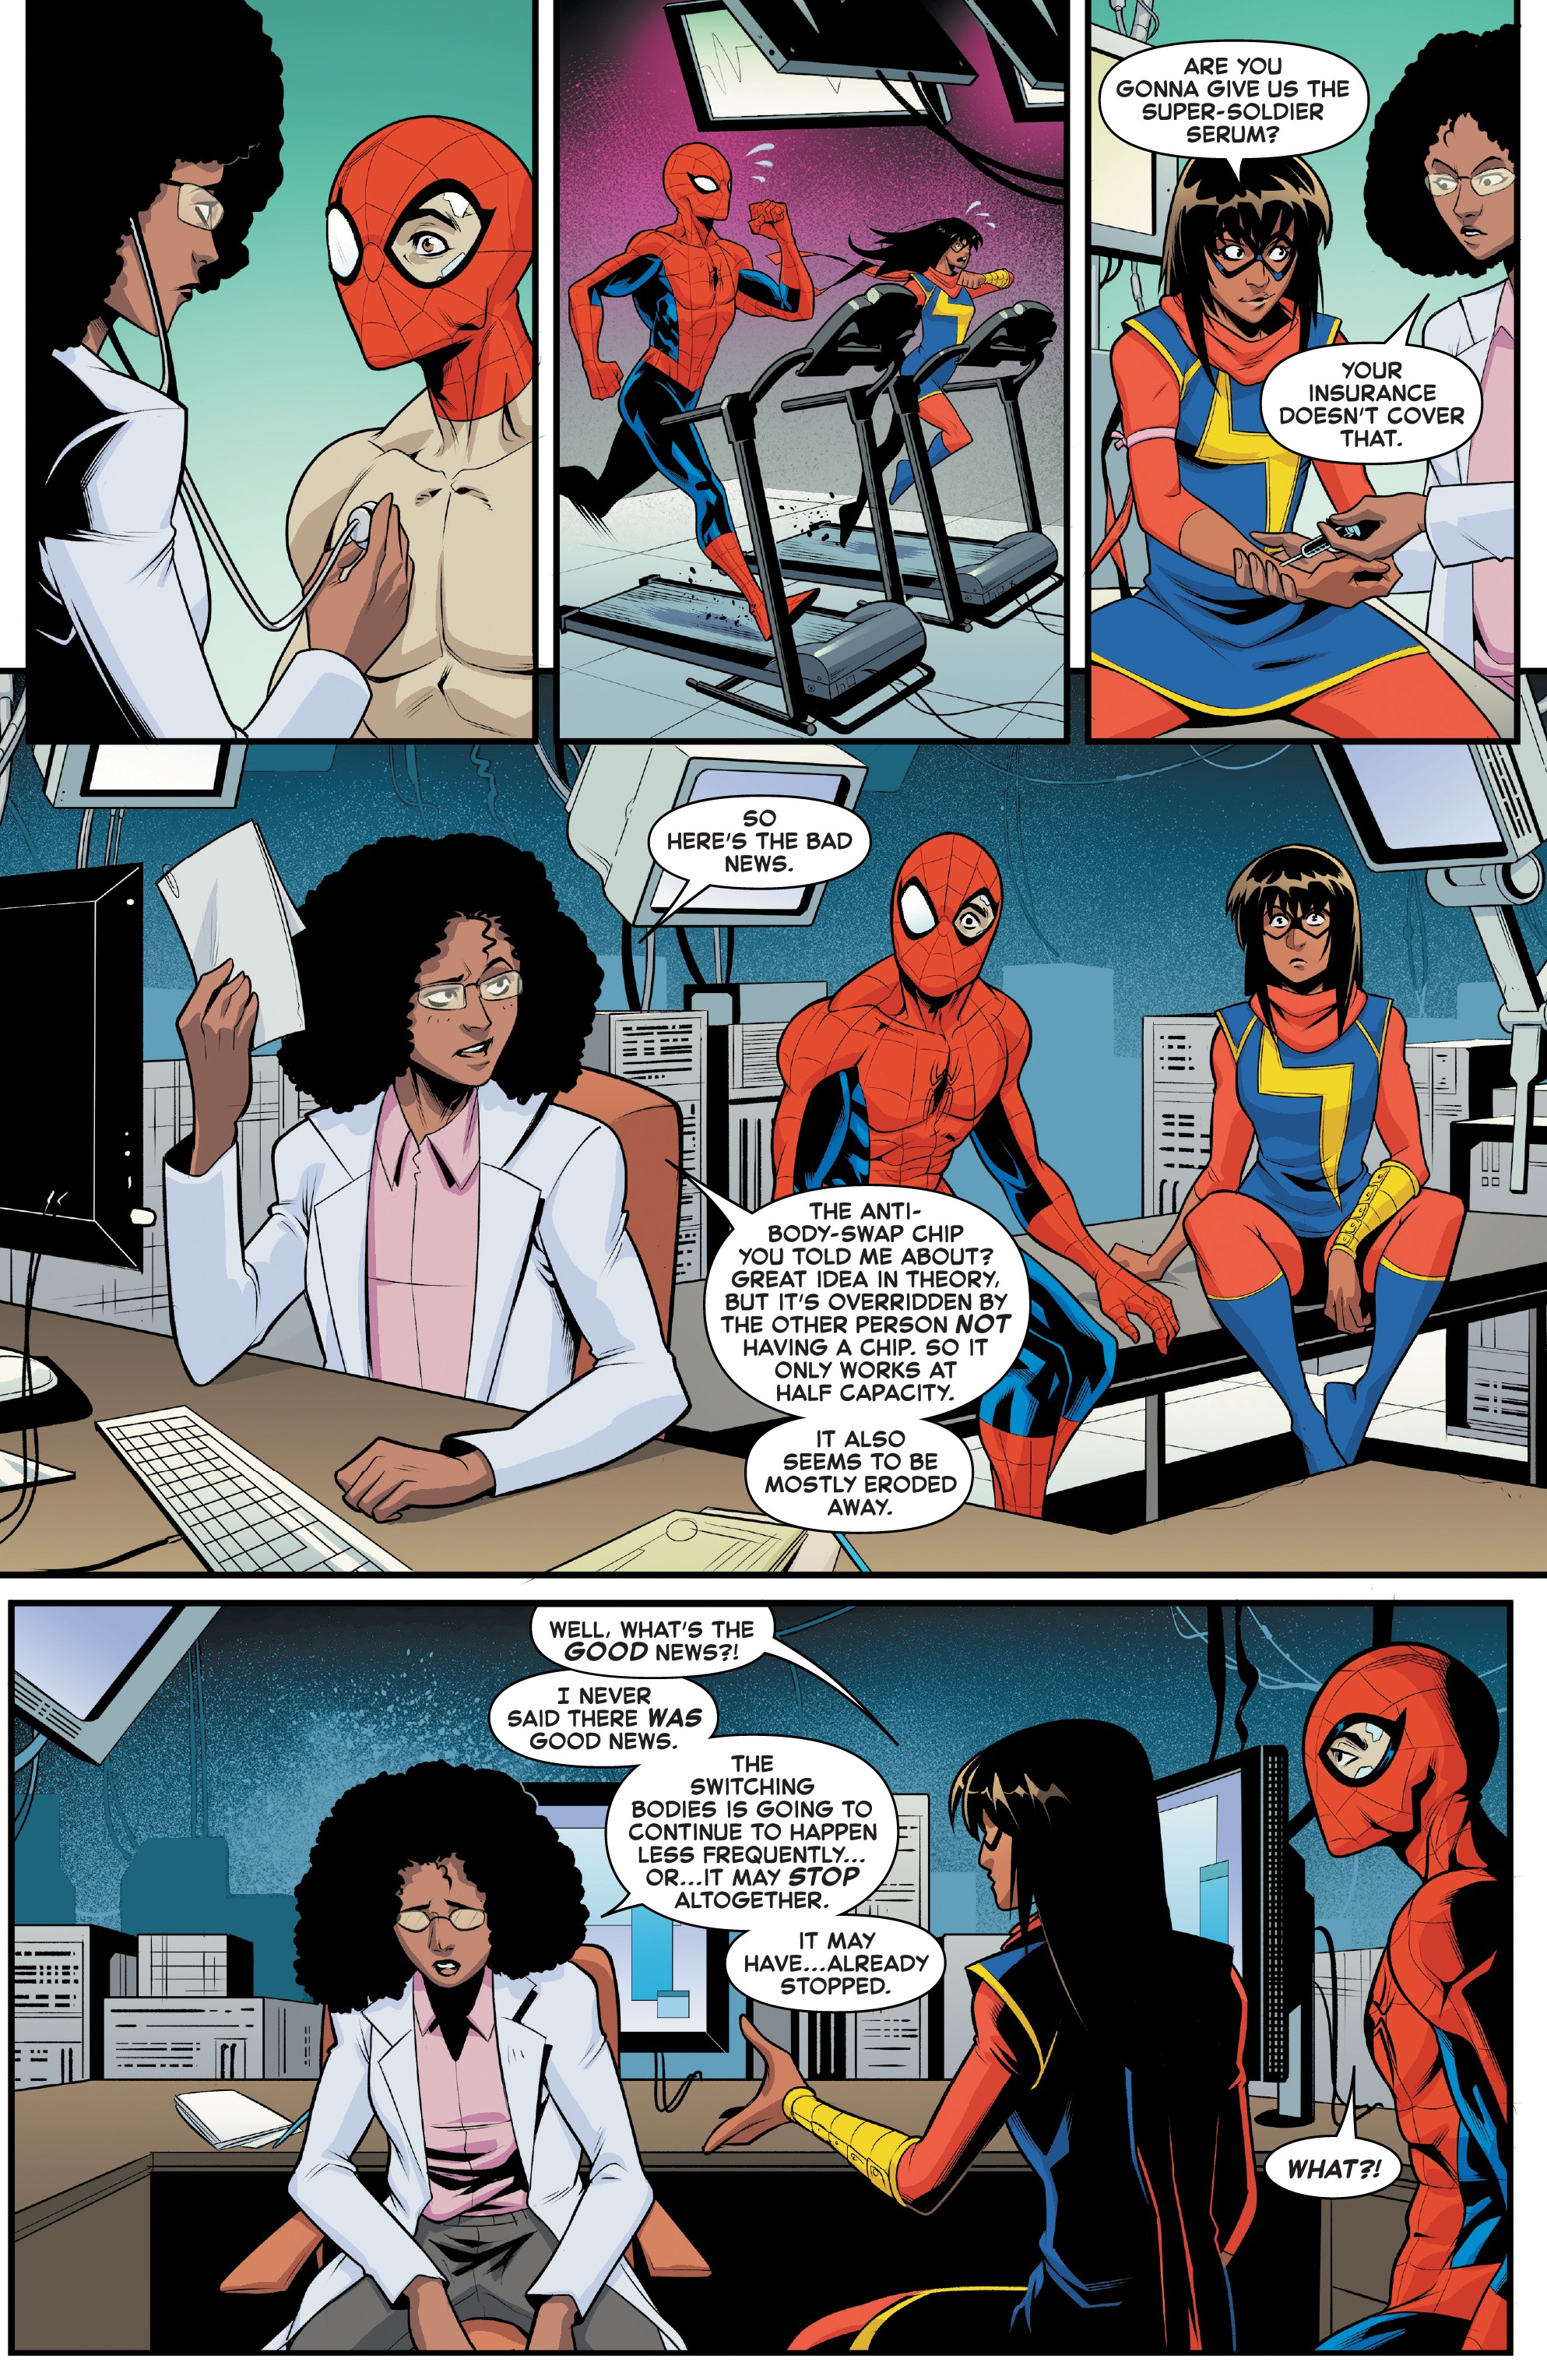 Marvel Team-Up (2019) 3 Page 12